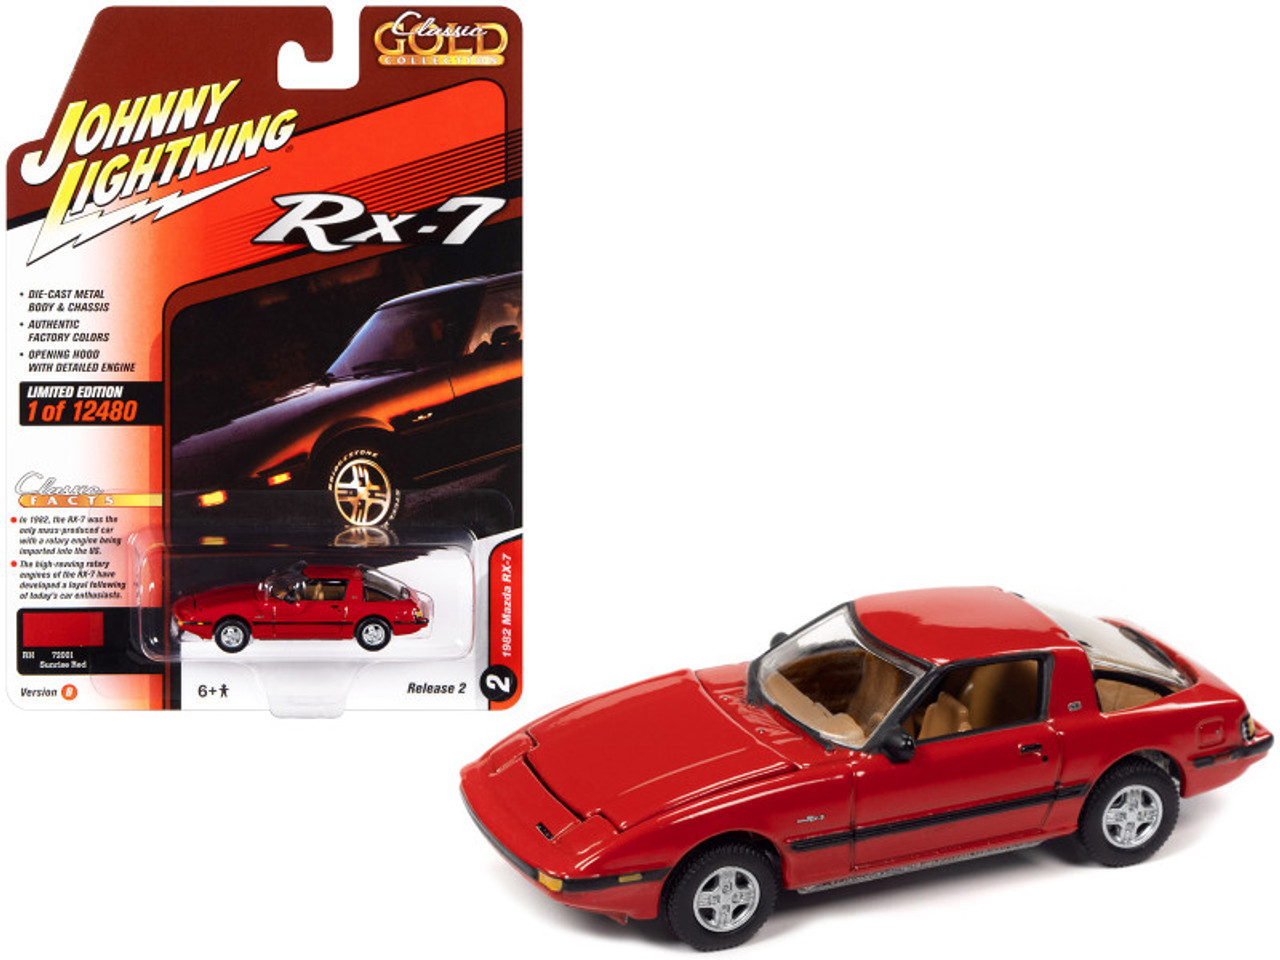 1982 Mazda RX-7 Sunrise Red with Black Stripes "Classic Gold Collection" Series Limited Edition to 12480 pieces Worldwide 1/64 Diecast Model Car by Johnny Lightning